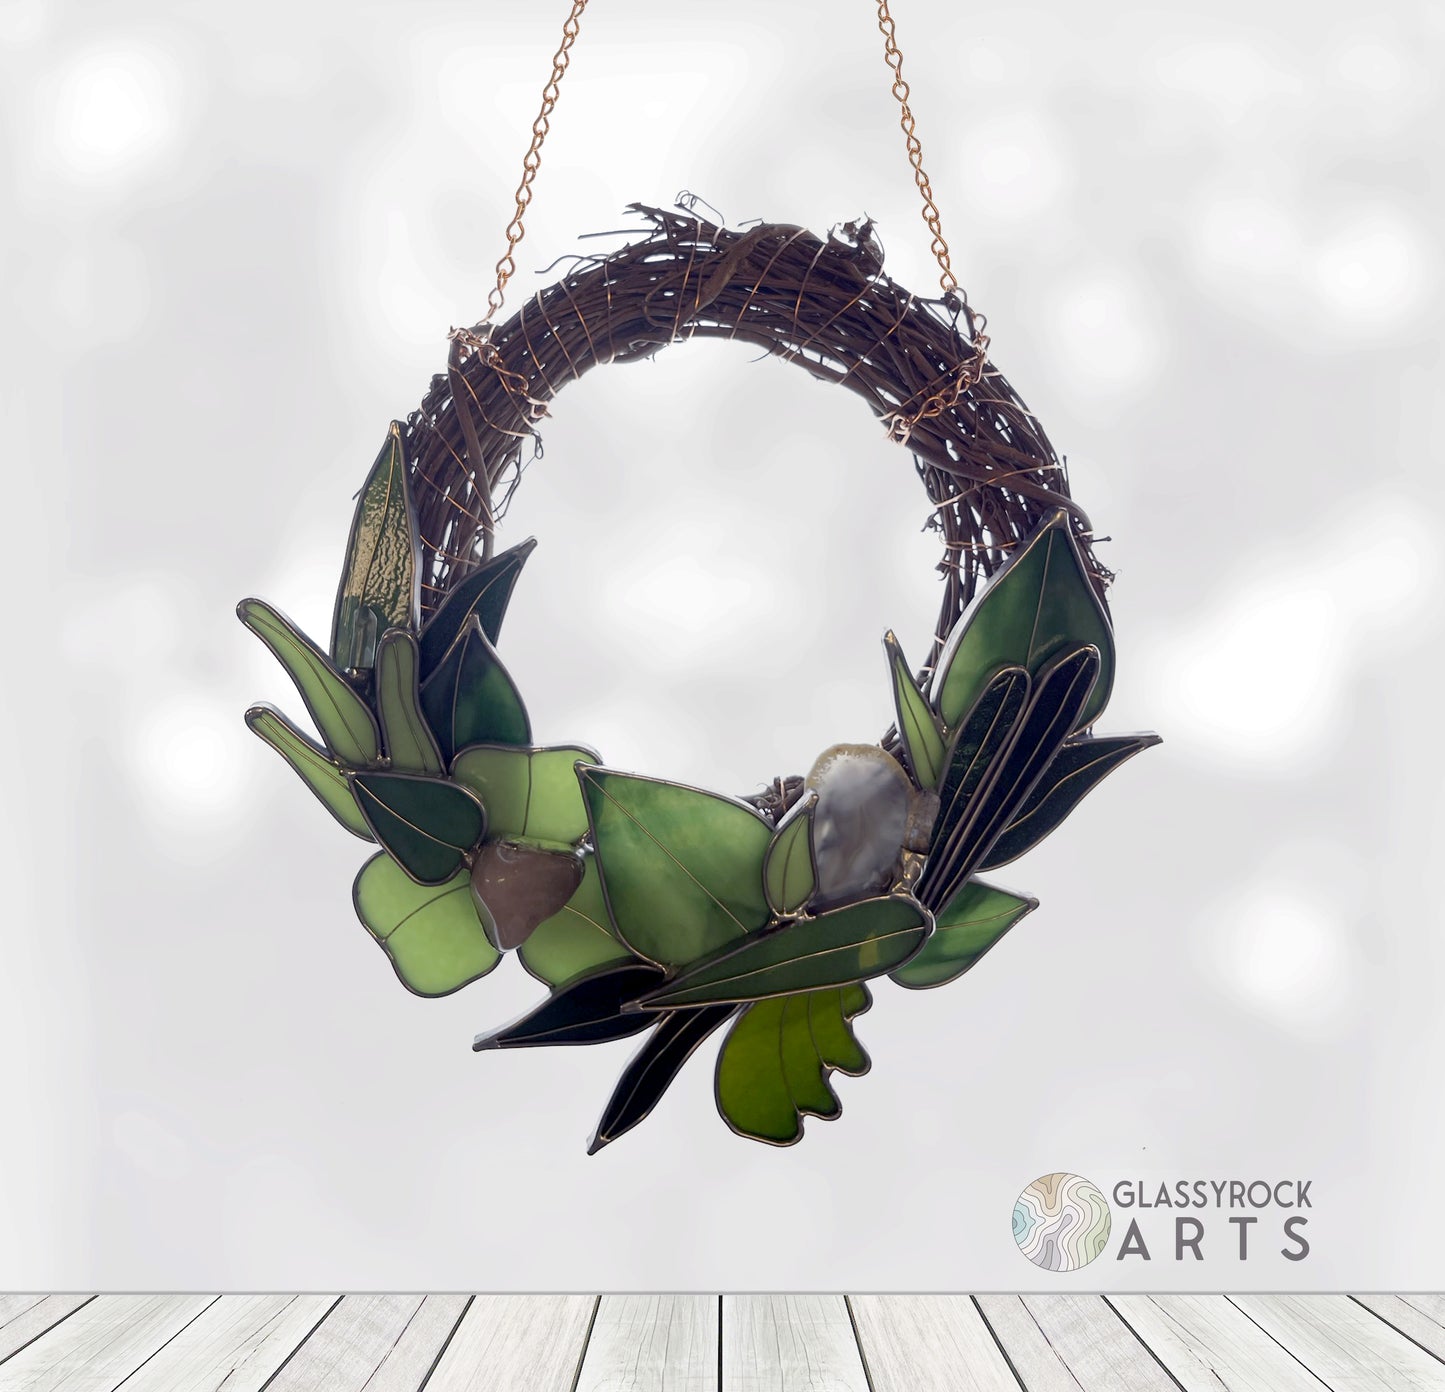 Handmade Botanical Stained Glass and Grapevine Wreath